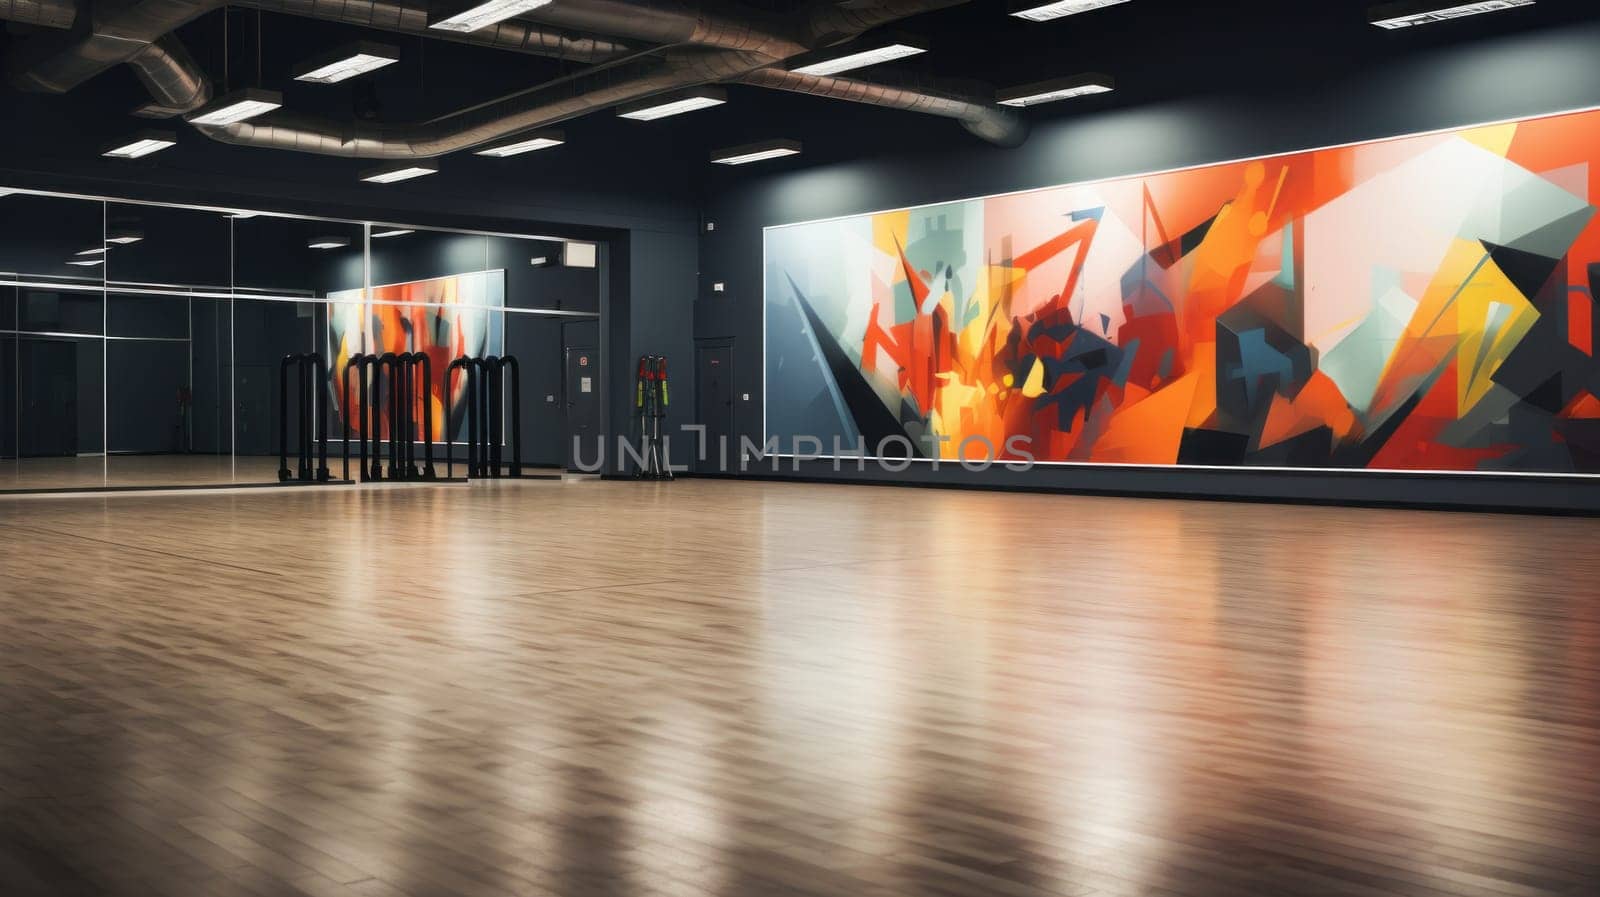 A large painting on the wall of a dance studio